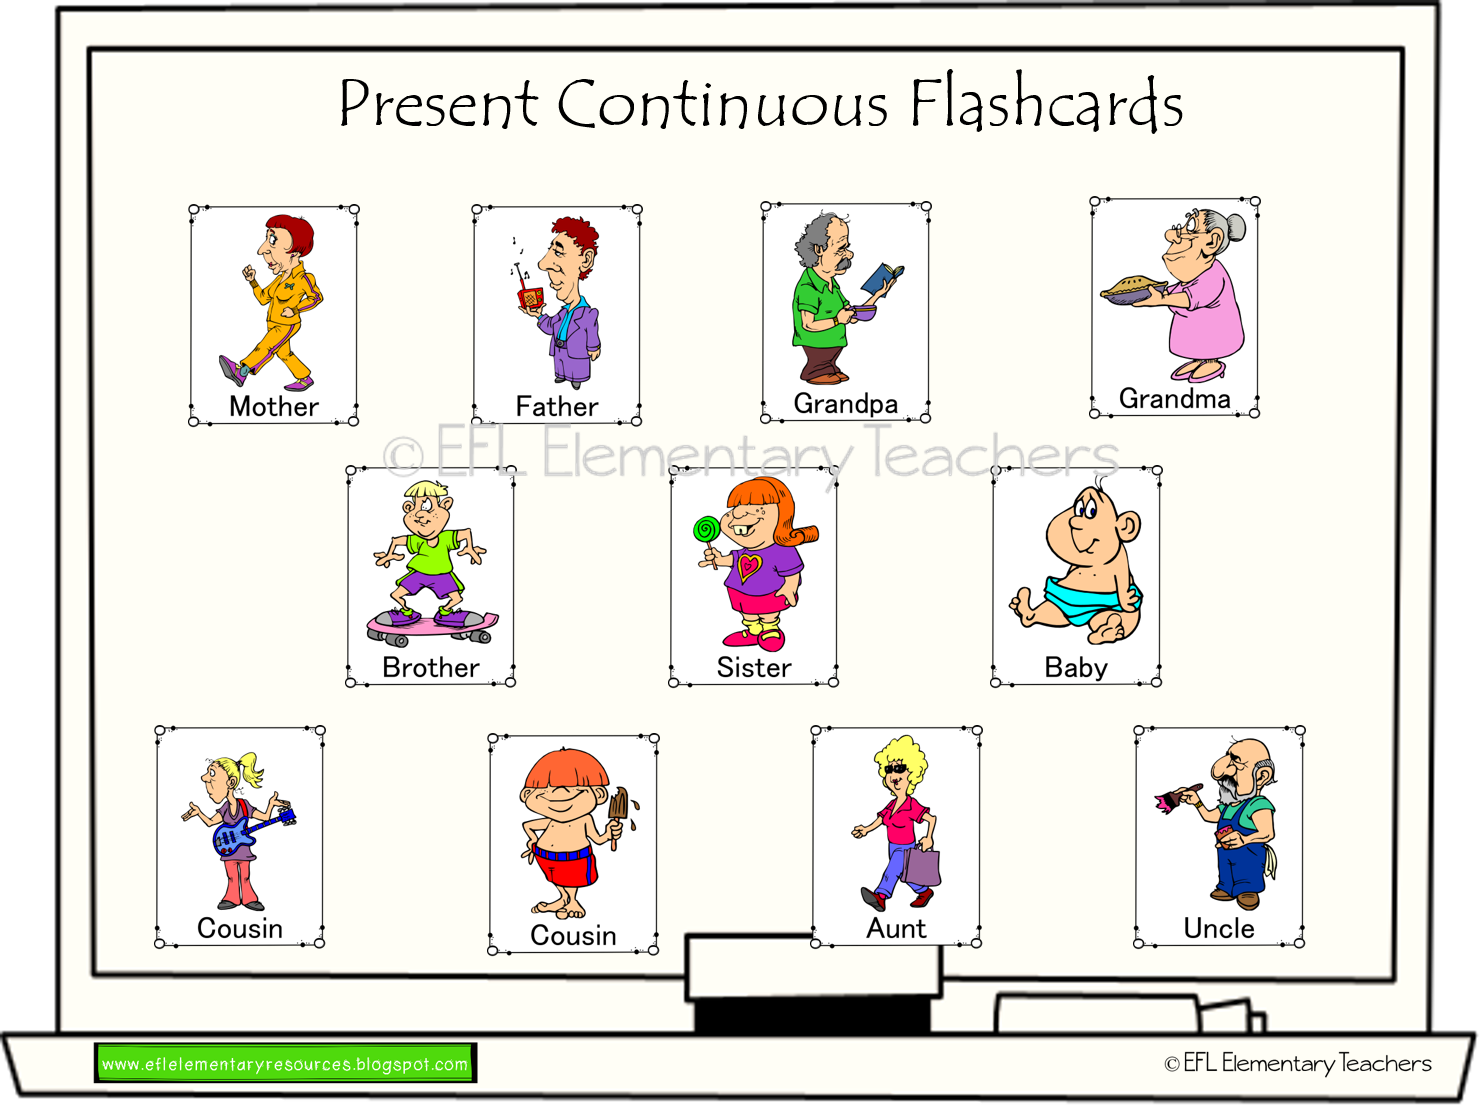 Continuous game for kids